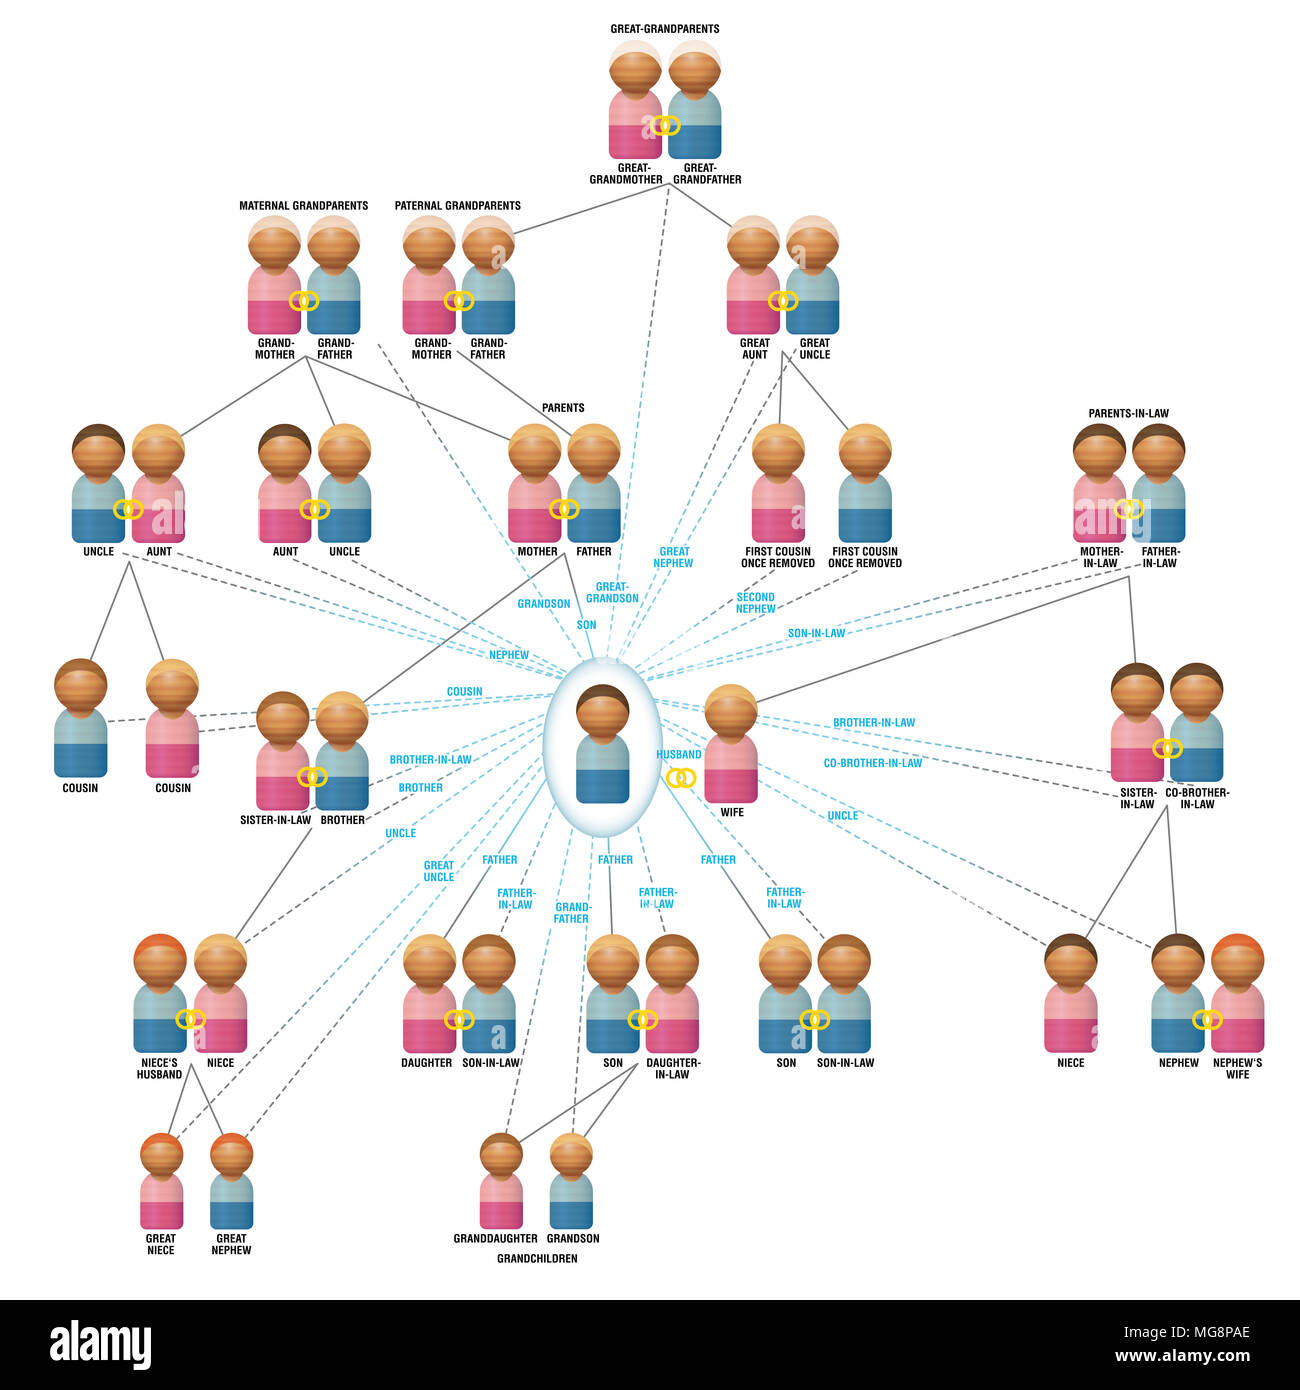 Family members network from a mans view as husband, father, son, brother, uncle, nephew etc, with family relatives like parents, children. Stock Photo